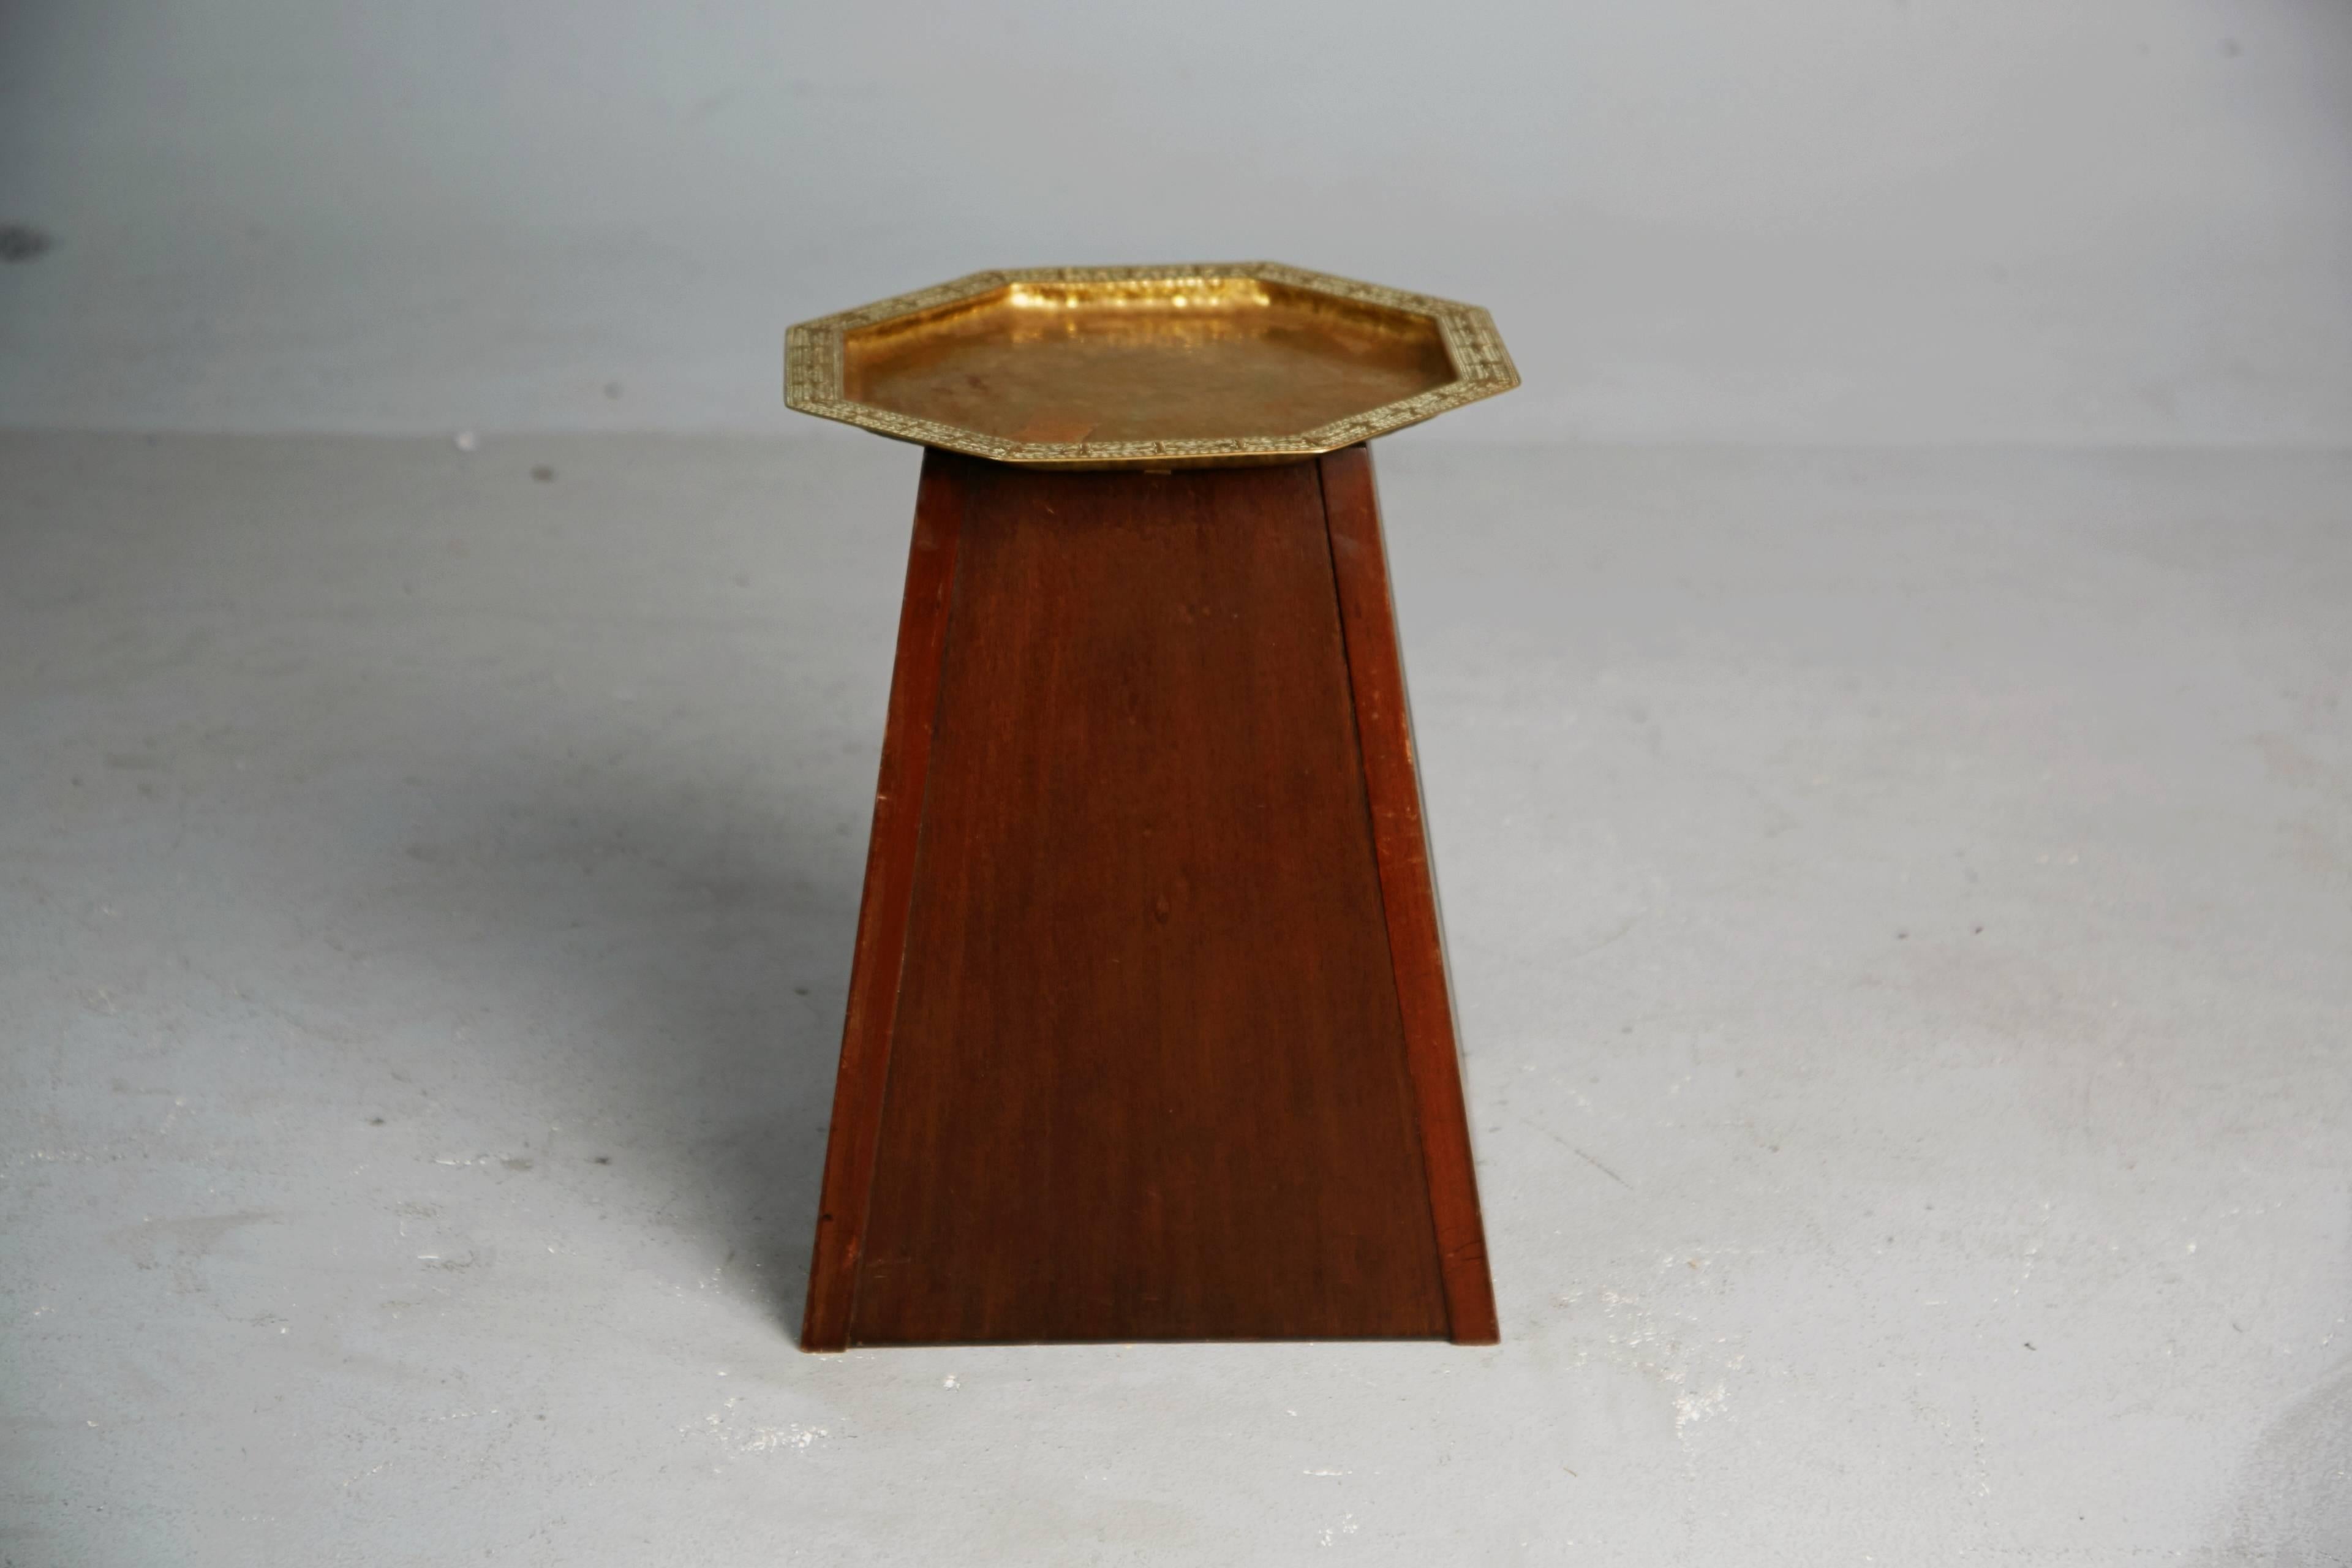 Expertly fabricated hand-hammered brass tray by German craftsman Georg Von Mendelssohn with mahogany stand, which was later added and affixed to the tray to create an attractive catch-all or side /end table. Mendelssohn's work opposed the declining